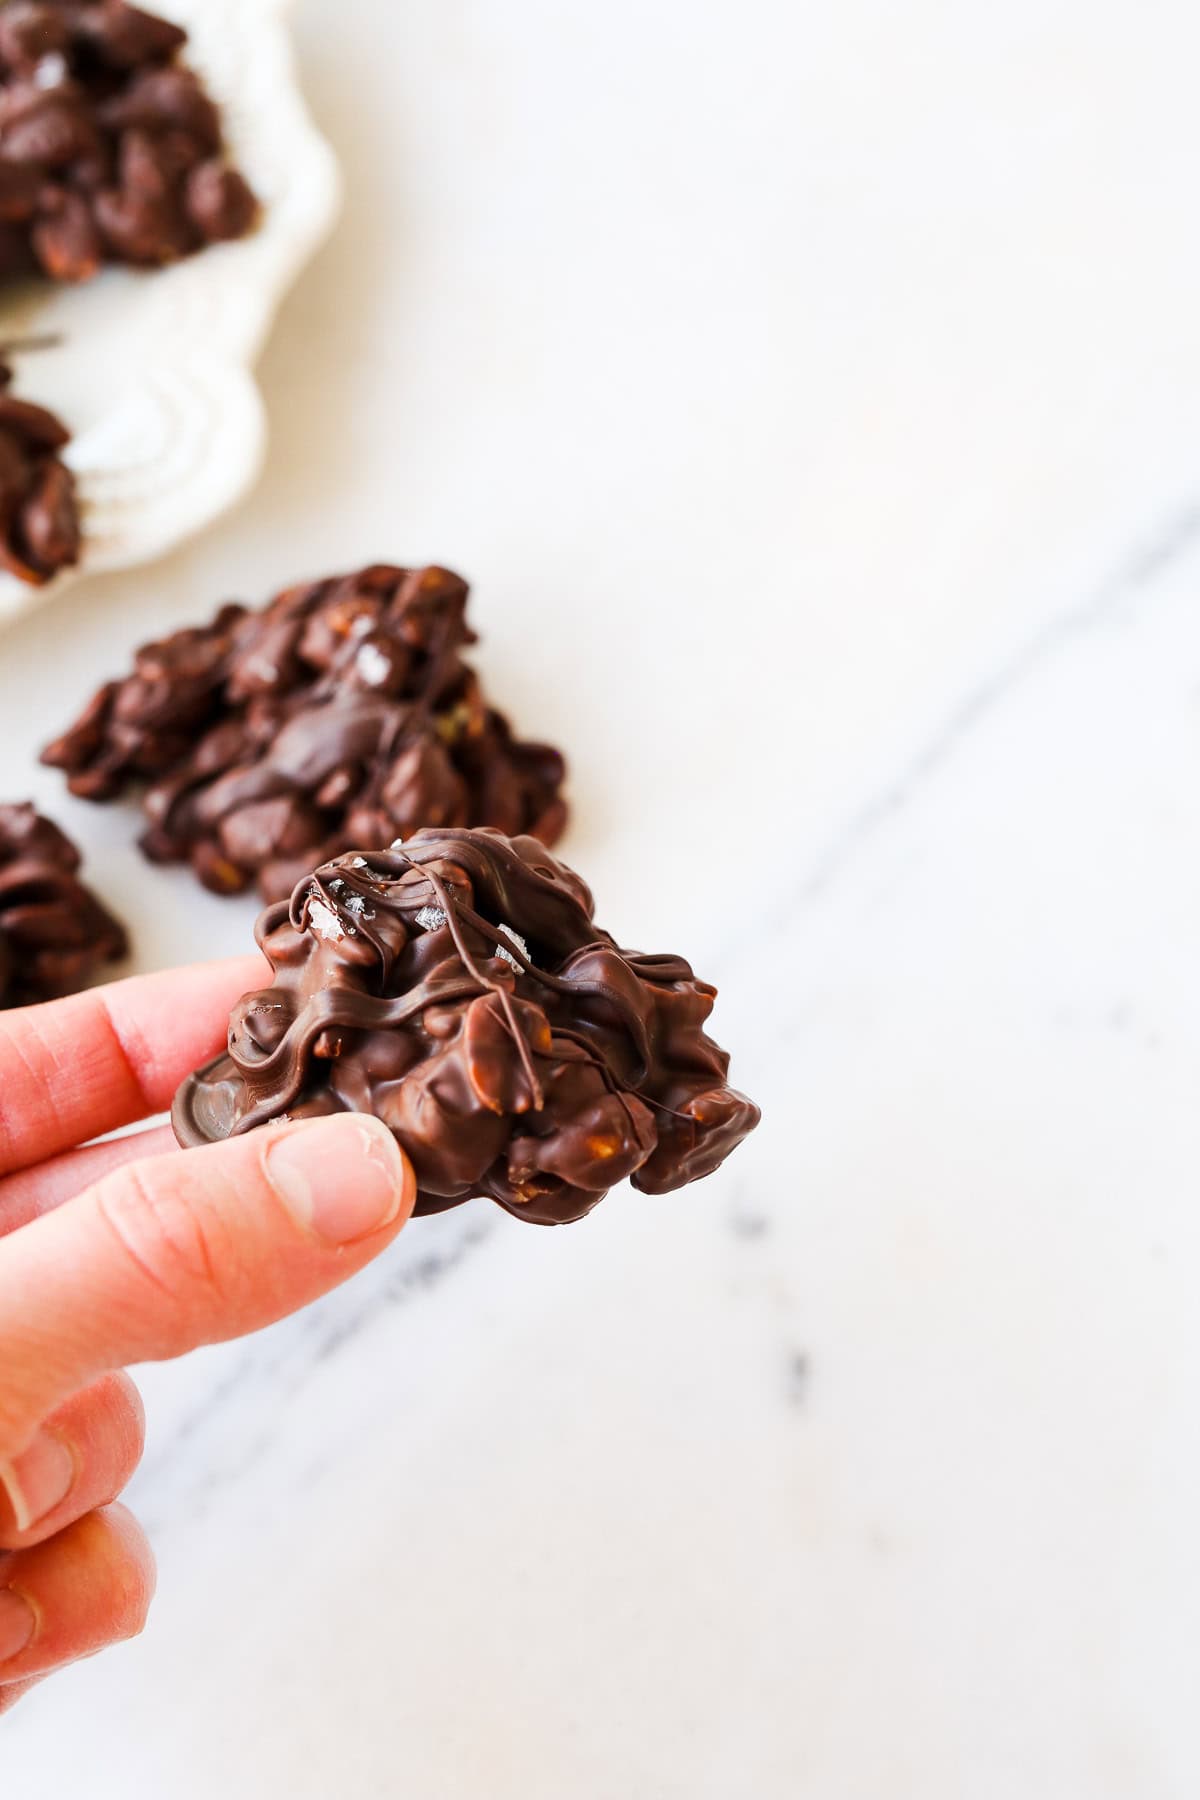 Chocolate Peanut Cluster being held in hand for picture.